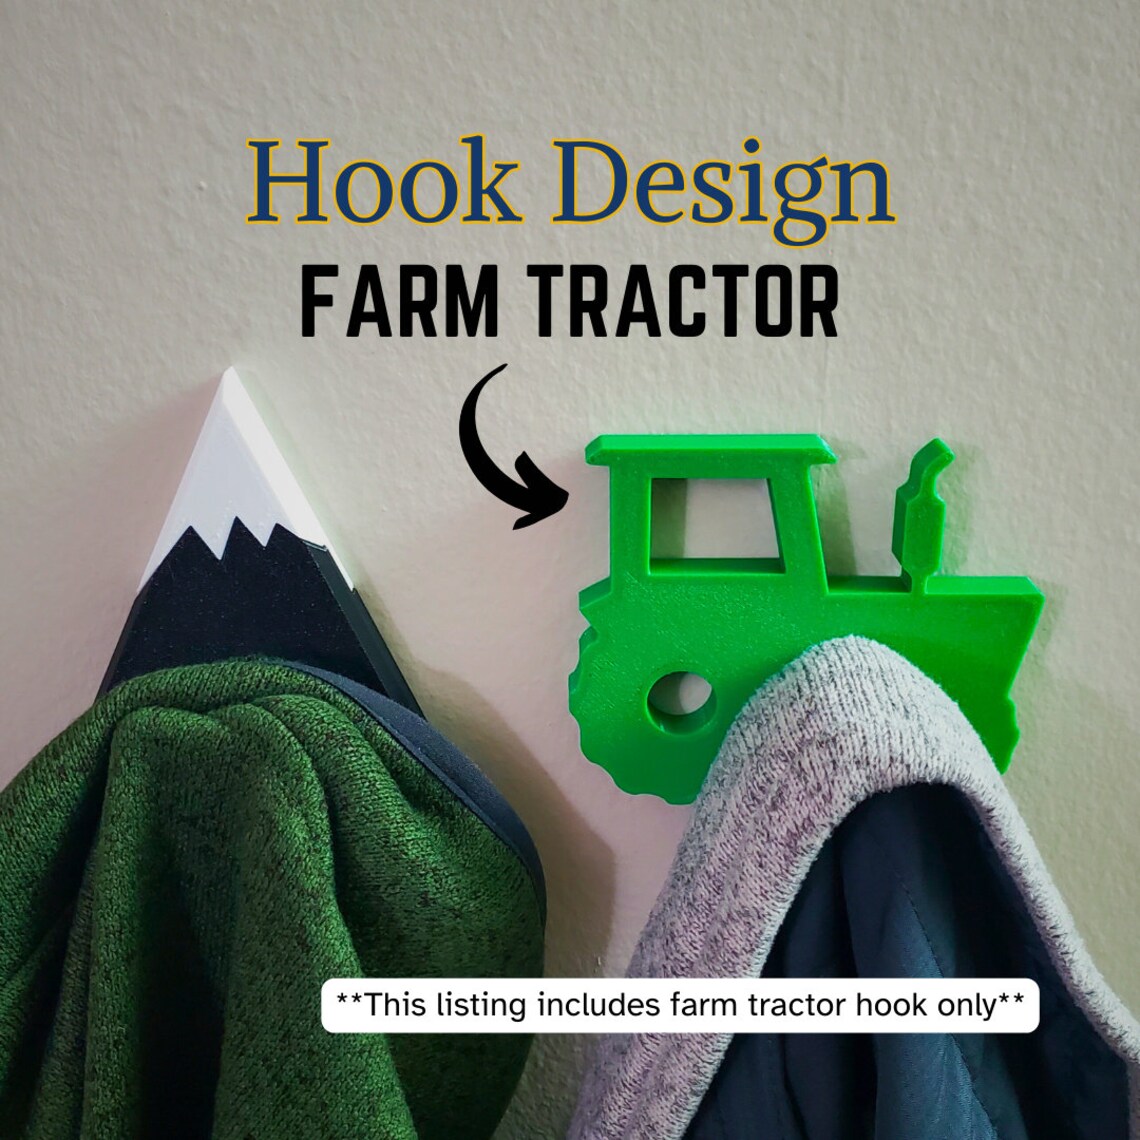 A farm tractor coat hook designed to hang sweatshirts, jackets and towels created by Ziggy Zig Designs.